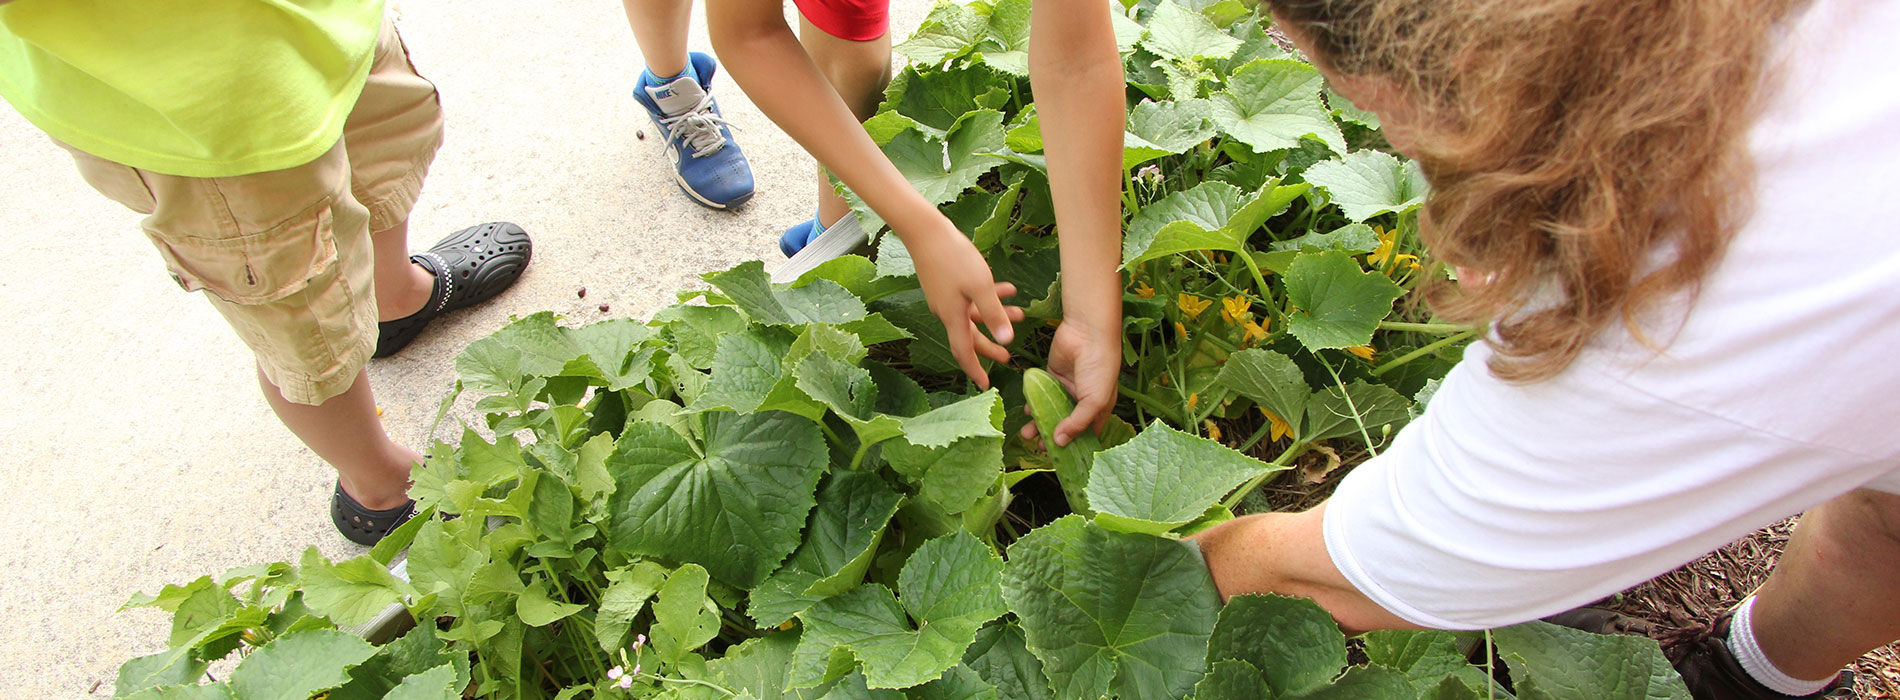 hands reaching into a raised bed with lettuce